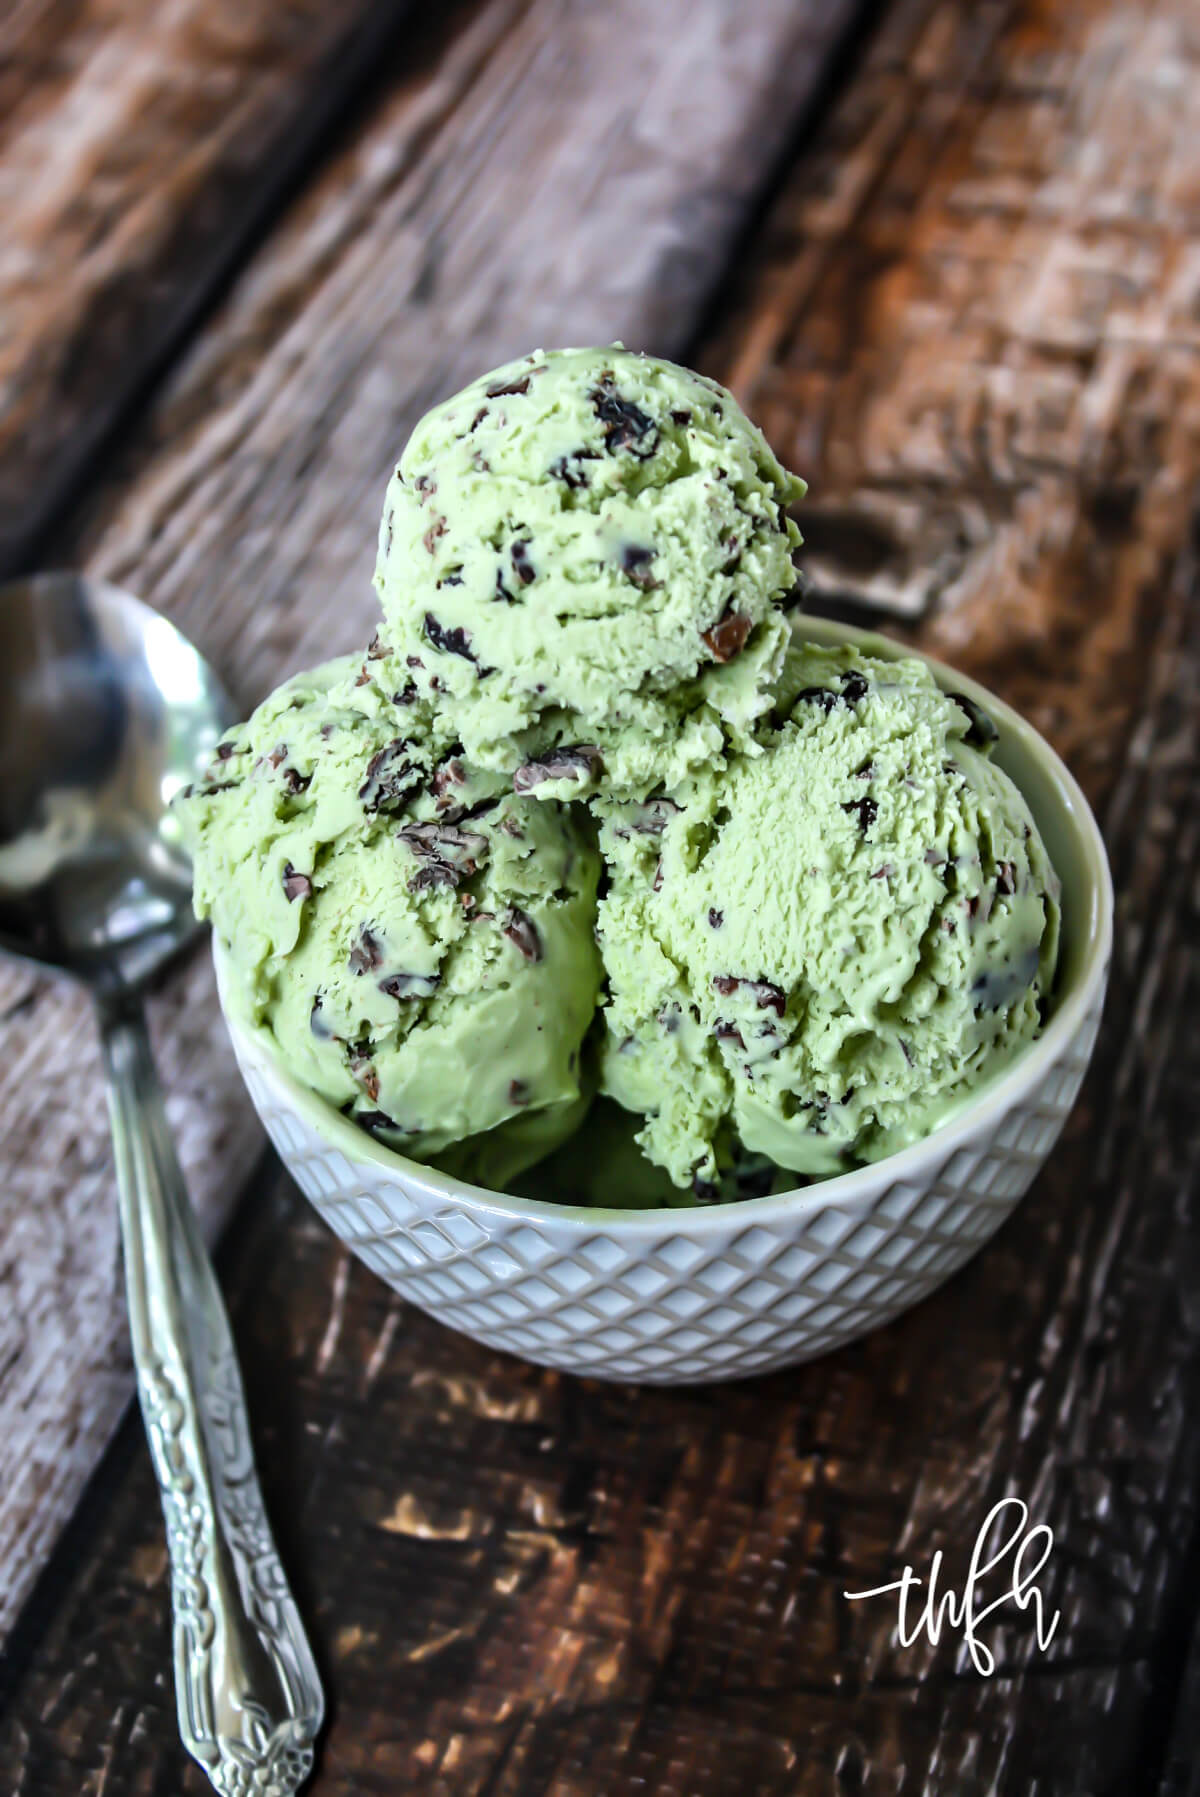 Vertical image of light green ice cream in a small decorative white bowl on a weathered wooden surface